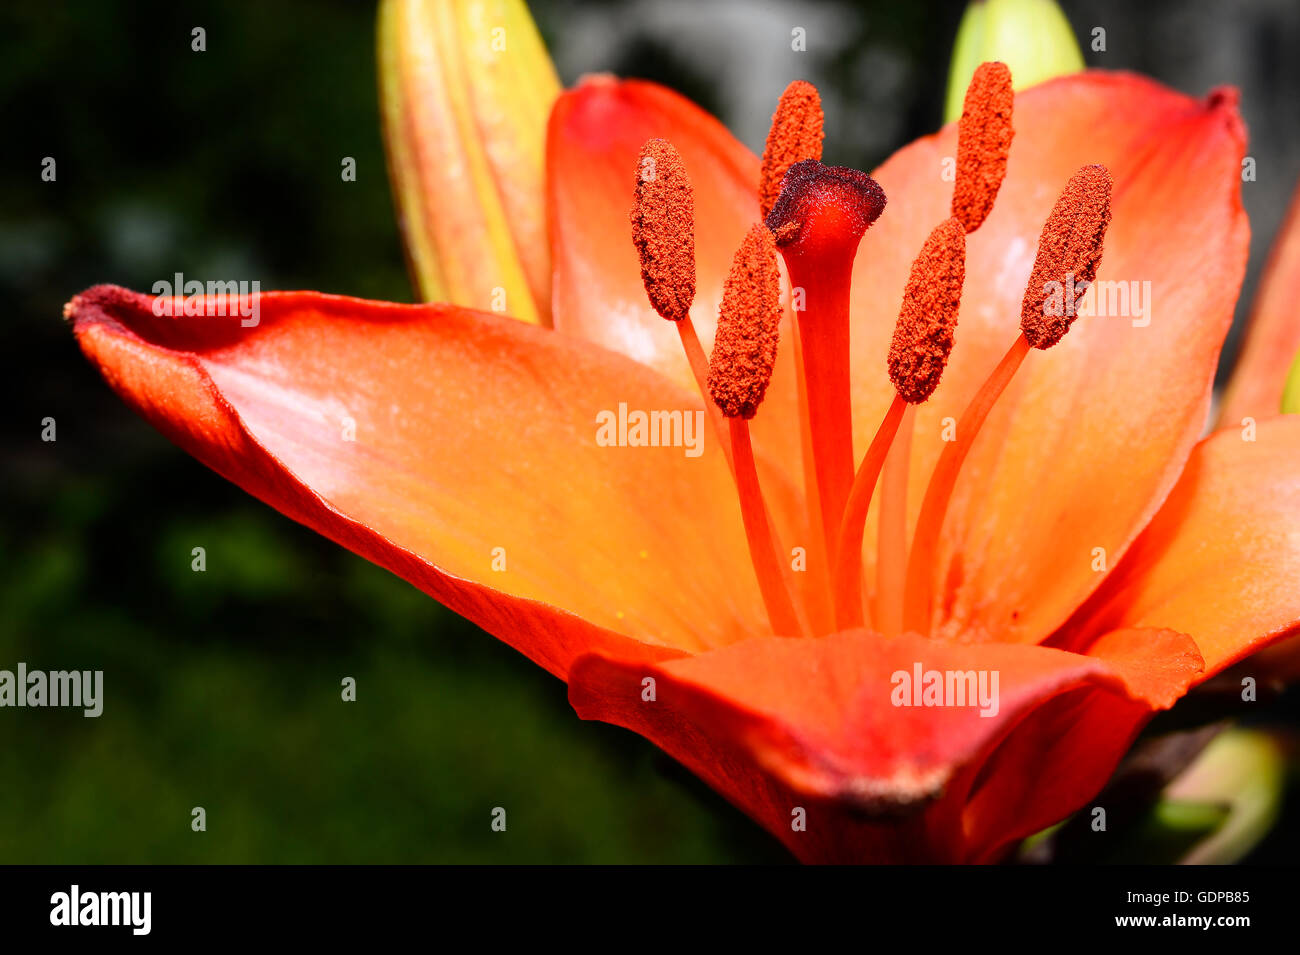 Flowering ornamental yellow lily in the garden closeup. Stock Photo